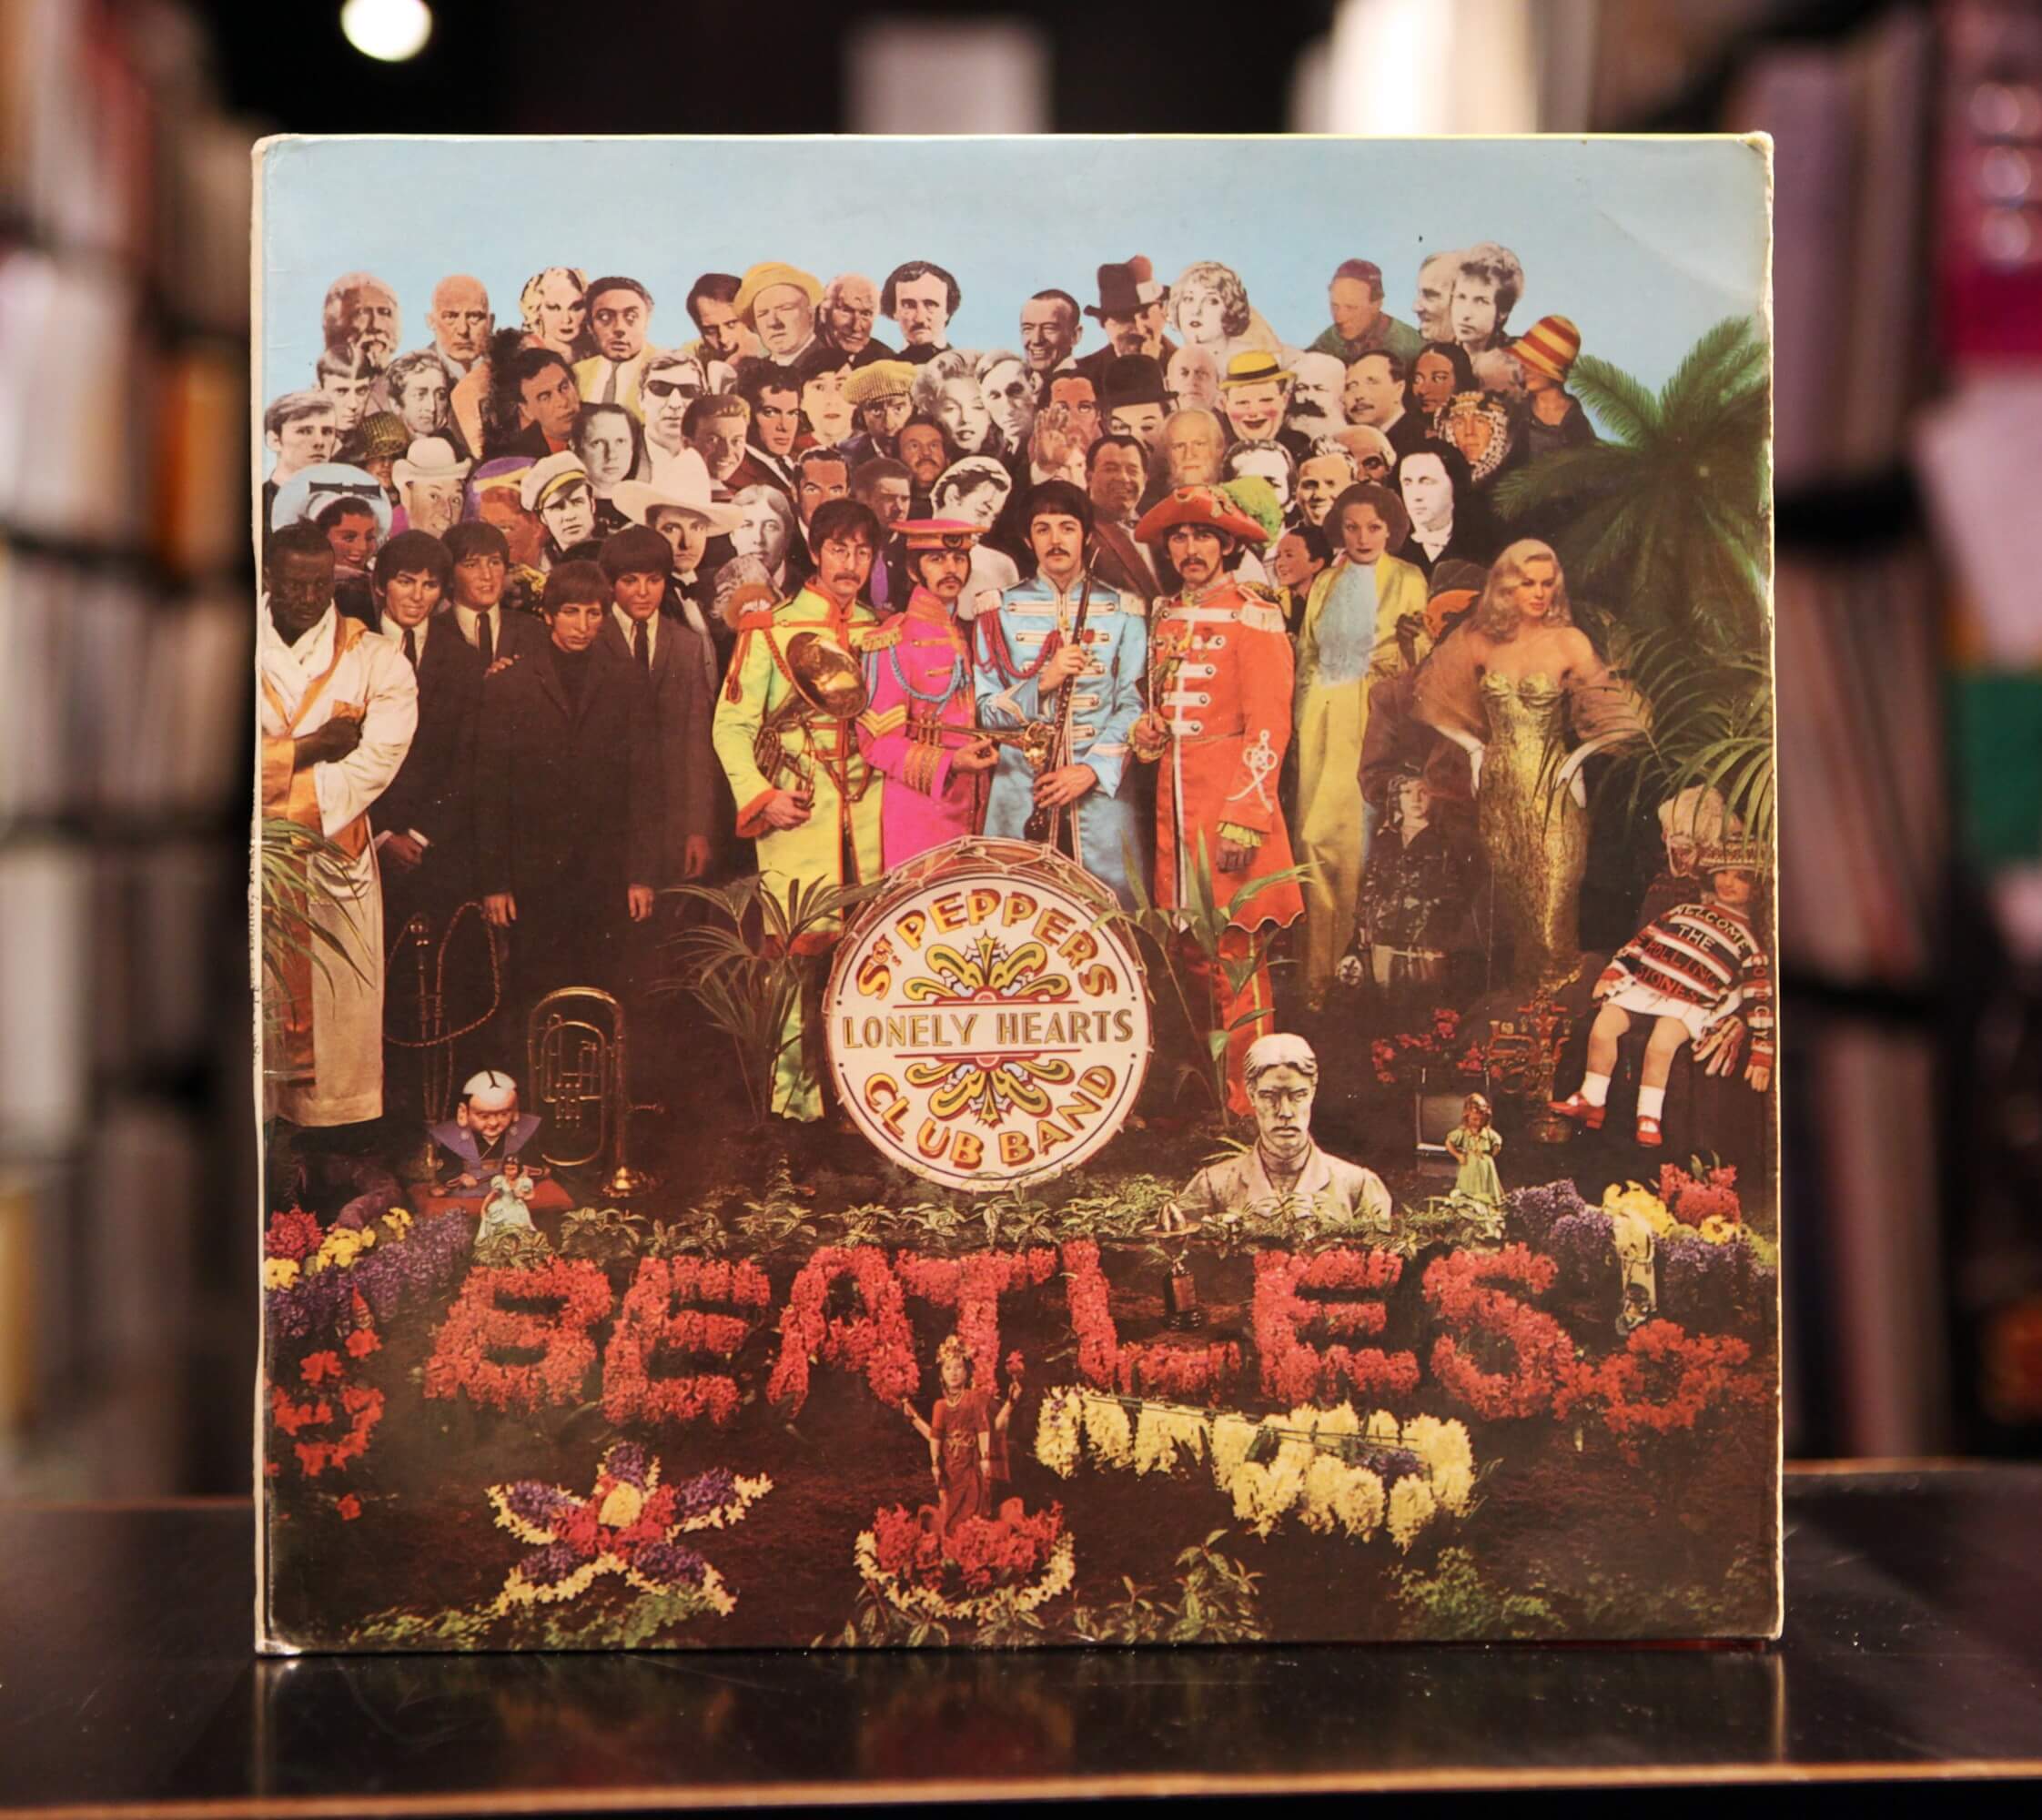 The Beatles' 'Sgt. Pepper's Lonely Hearts Club Band' on vinyl